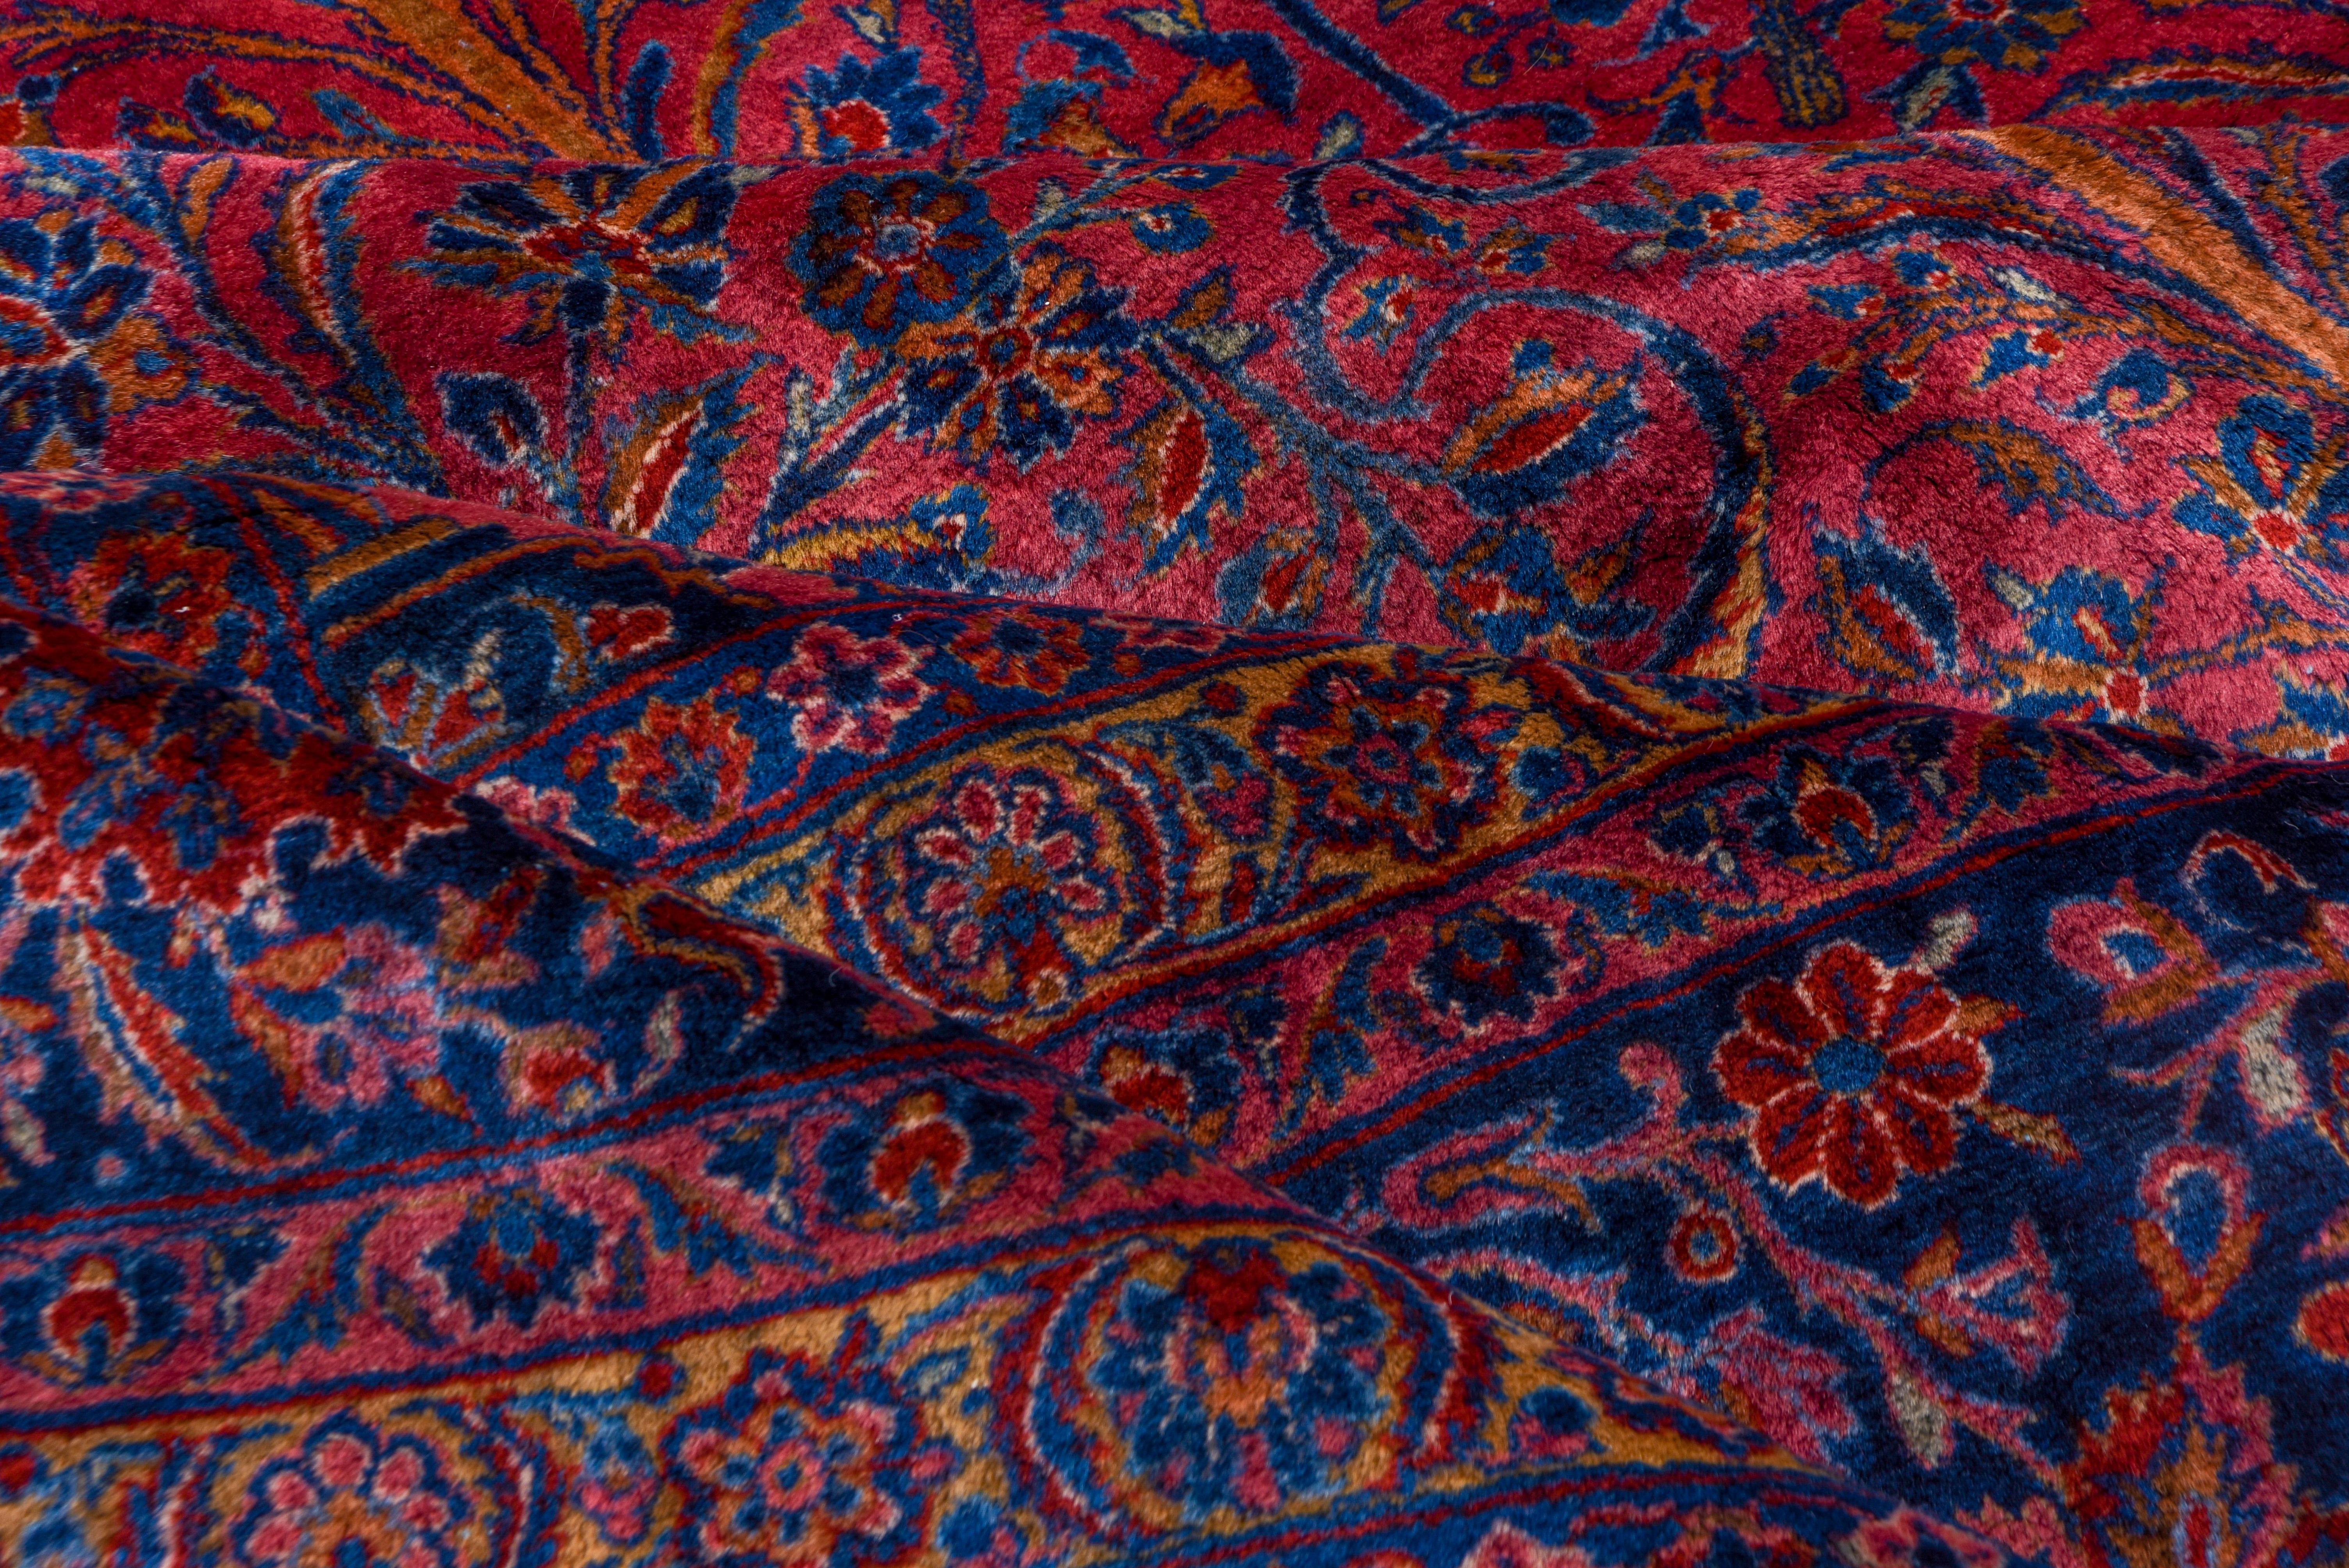 This ruby red ground, royal blue border Manchester wool central Persian city carpet, is absolutely characteristic of the type and period, with a fine weave and velvety surface texture. The all-over pattern of vases, leaves, stems and flower sprays